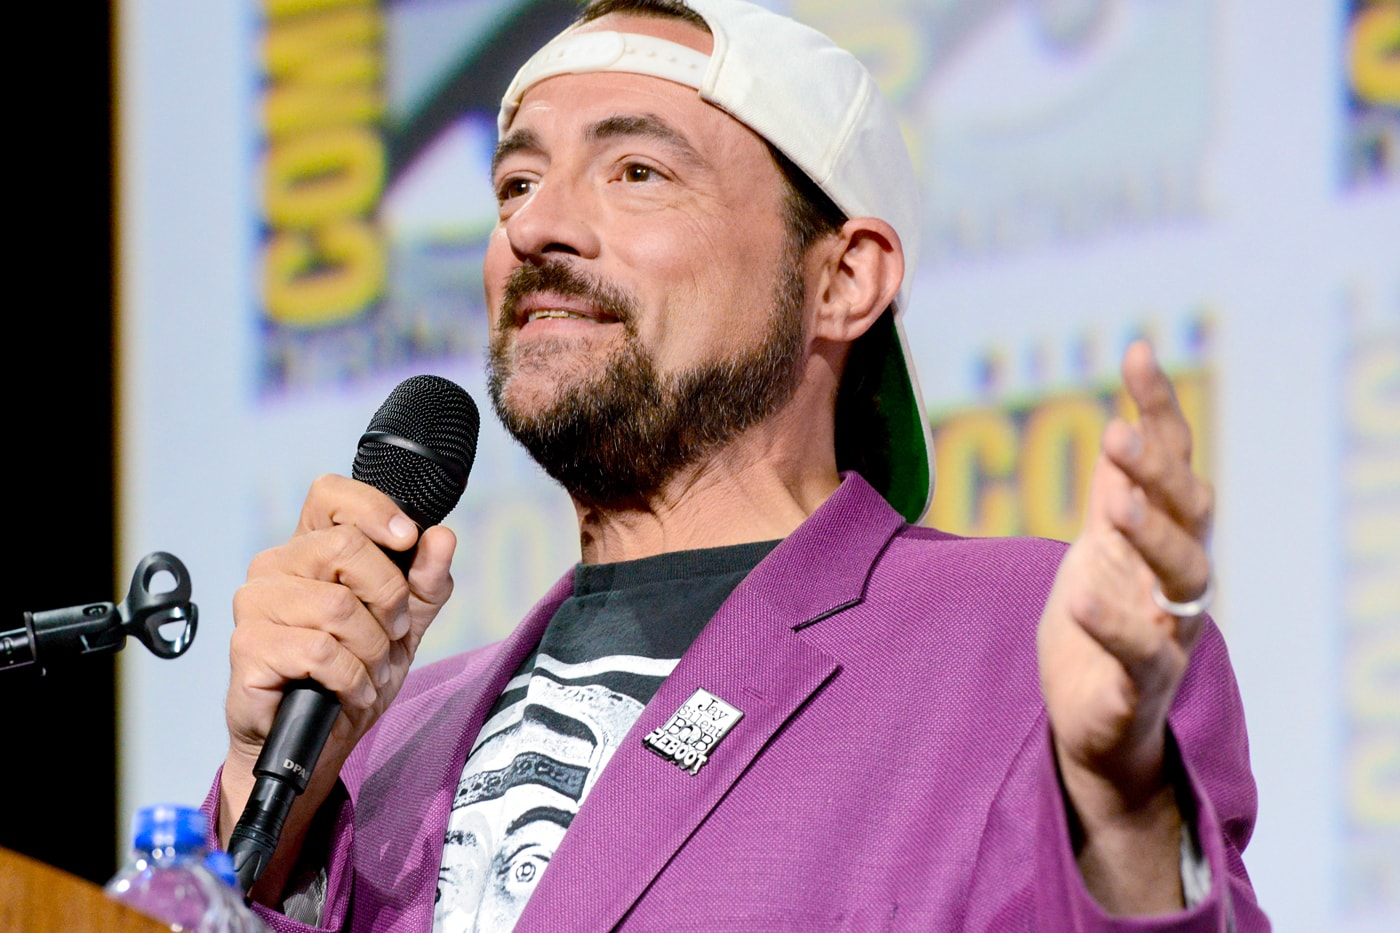 Kevin Smith Selling next film Killroy Was Here as NFT non fungible token jay and silent bob strikes back